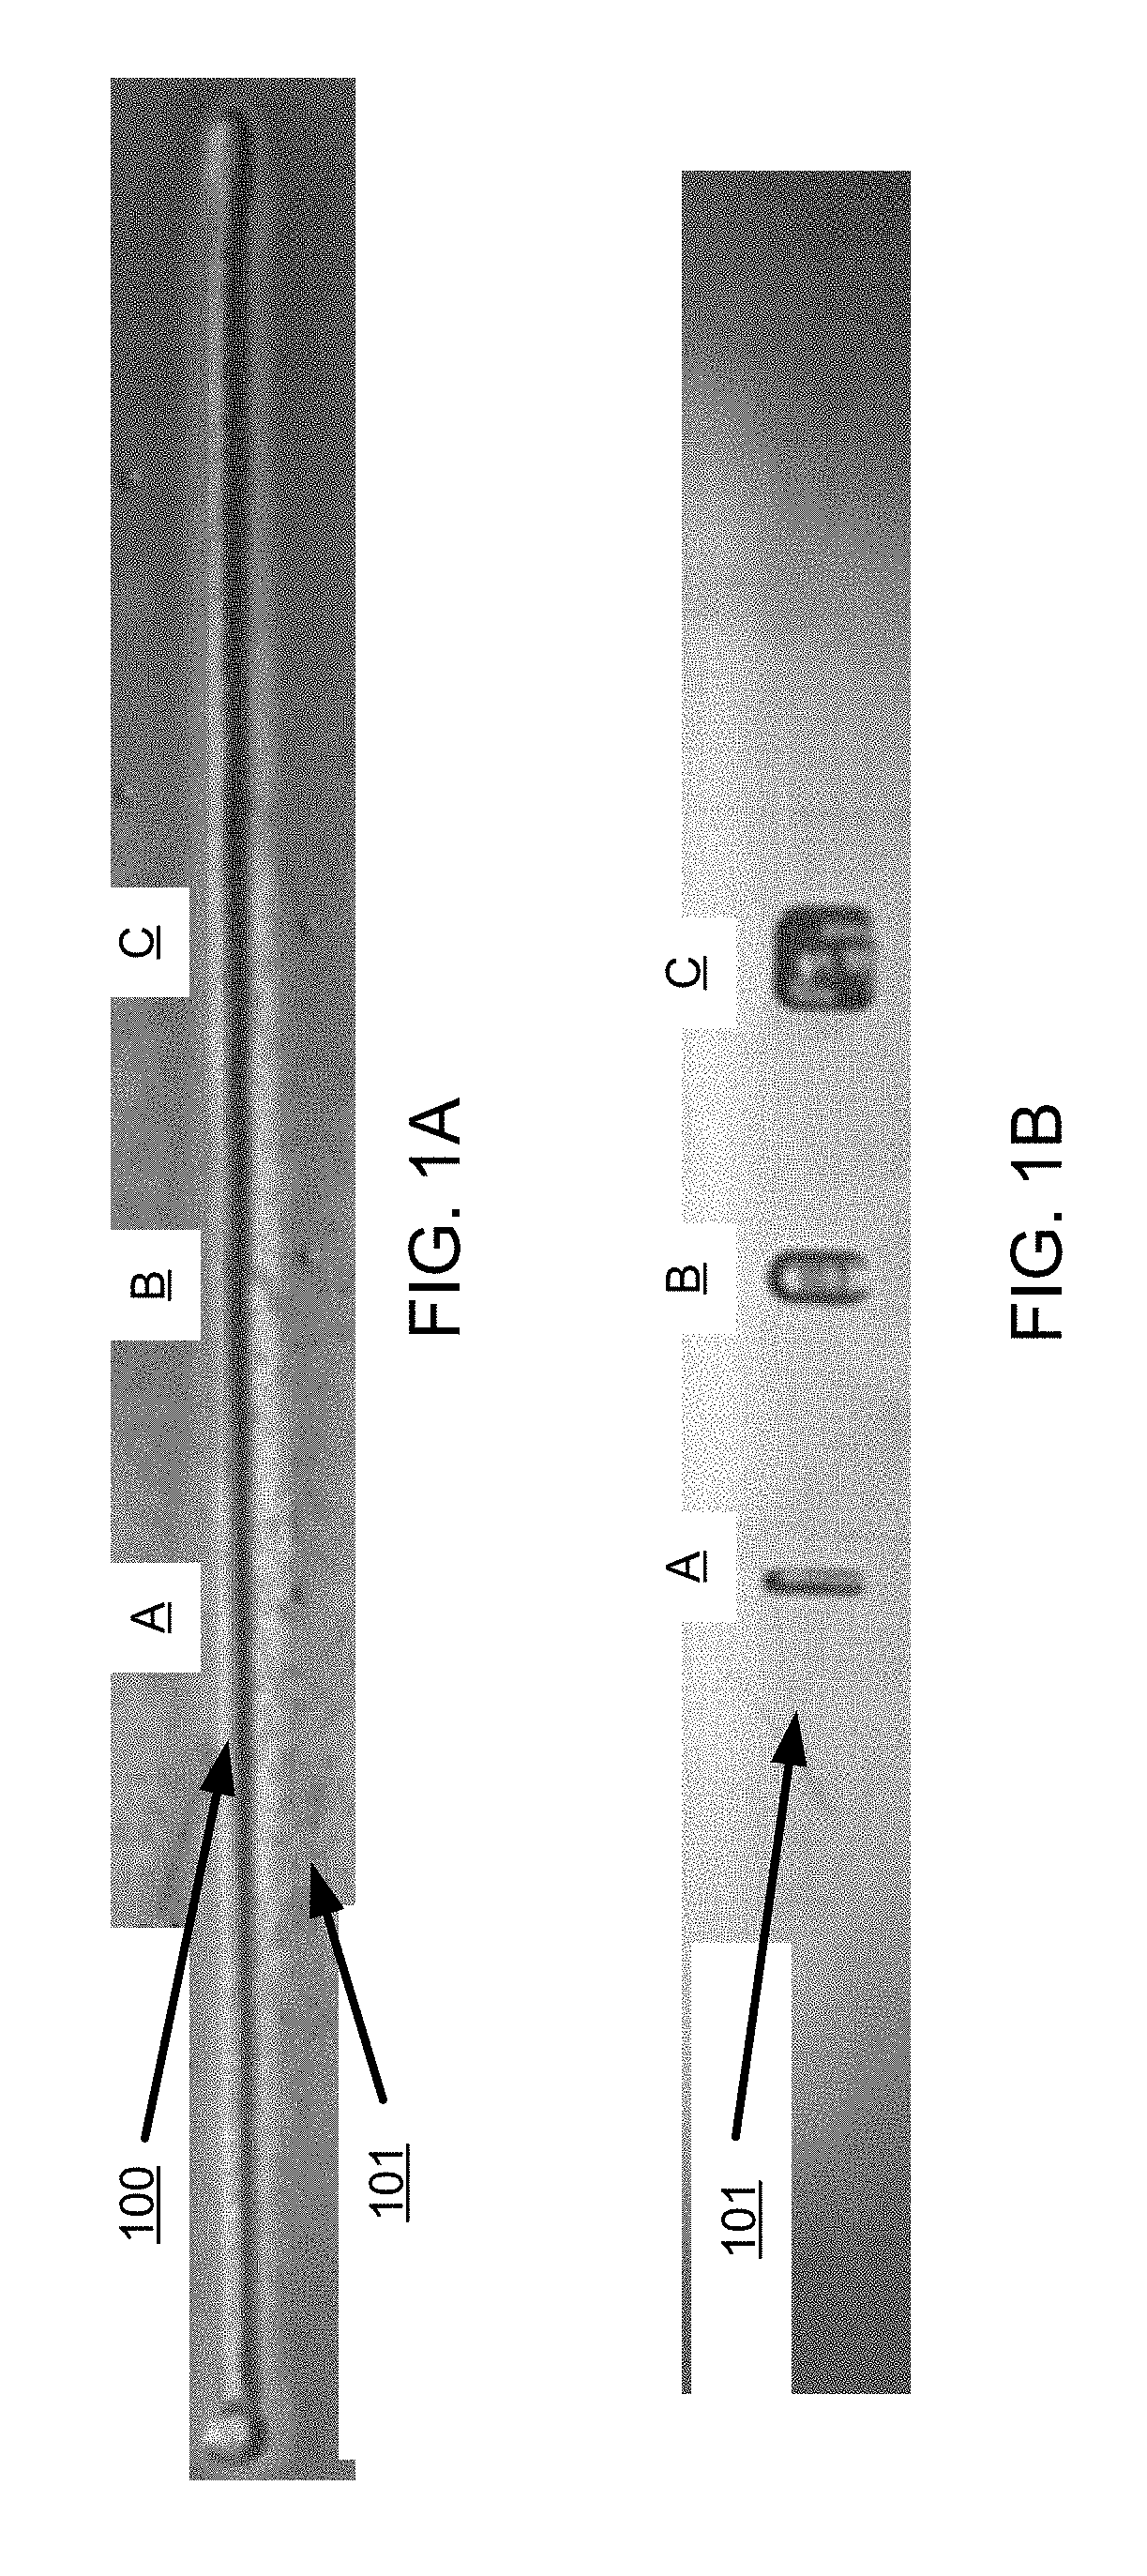 System and Method for In-Situ Characterization and Inspection of Additive Manufacturing Deposits Using Transient Infrared Thermography